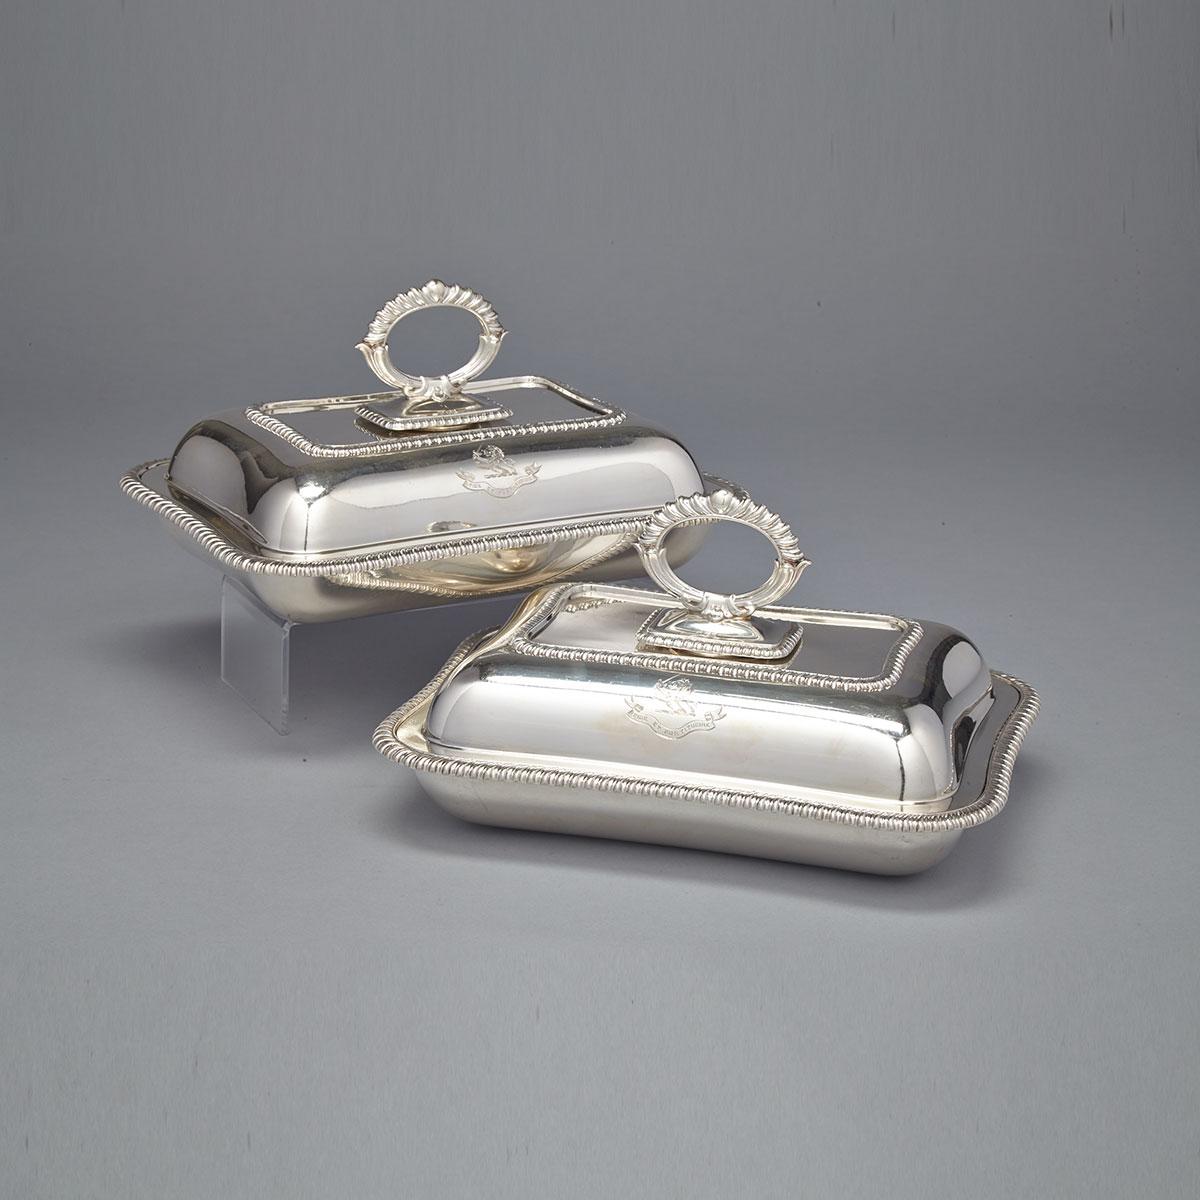 Pair of English Silver Covered Entrée Dishes, Joseph Rodgers & Sons, Sheffield, 1910